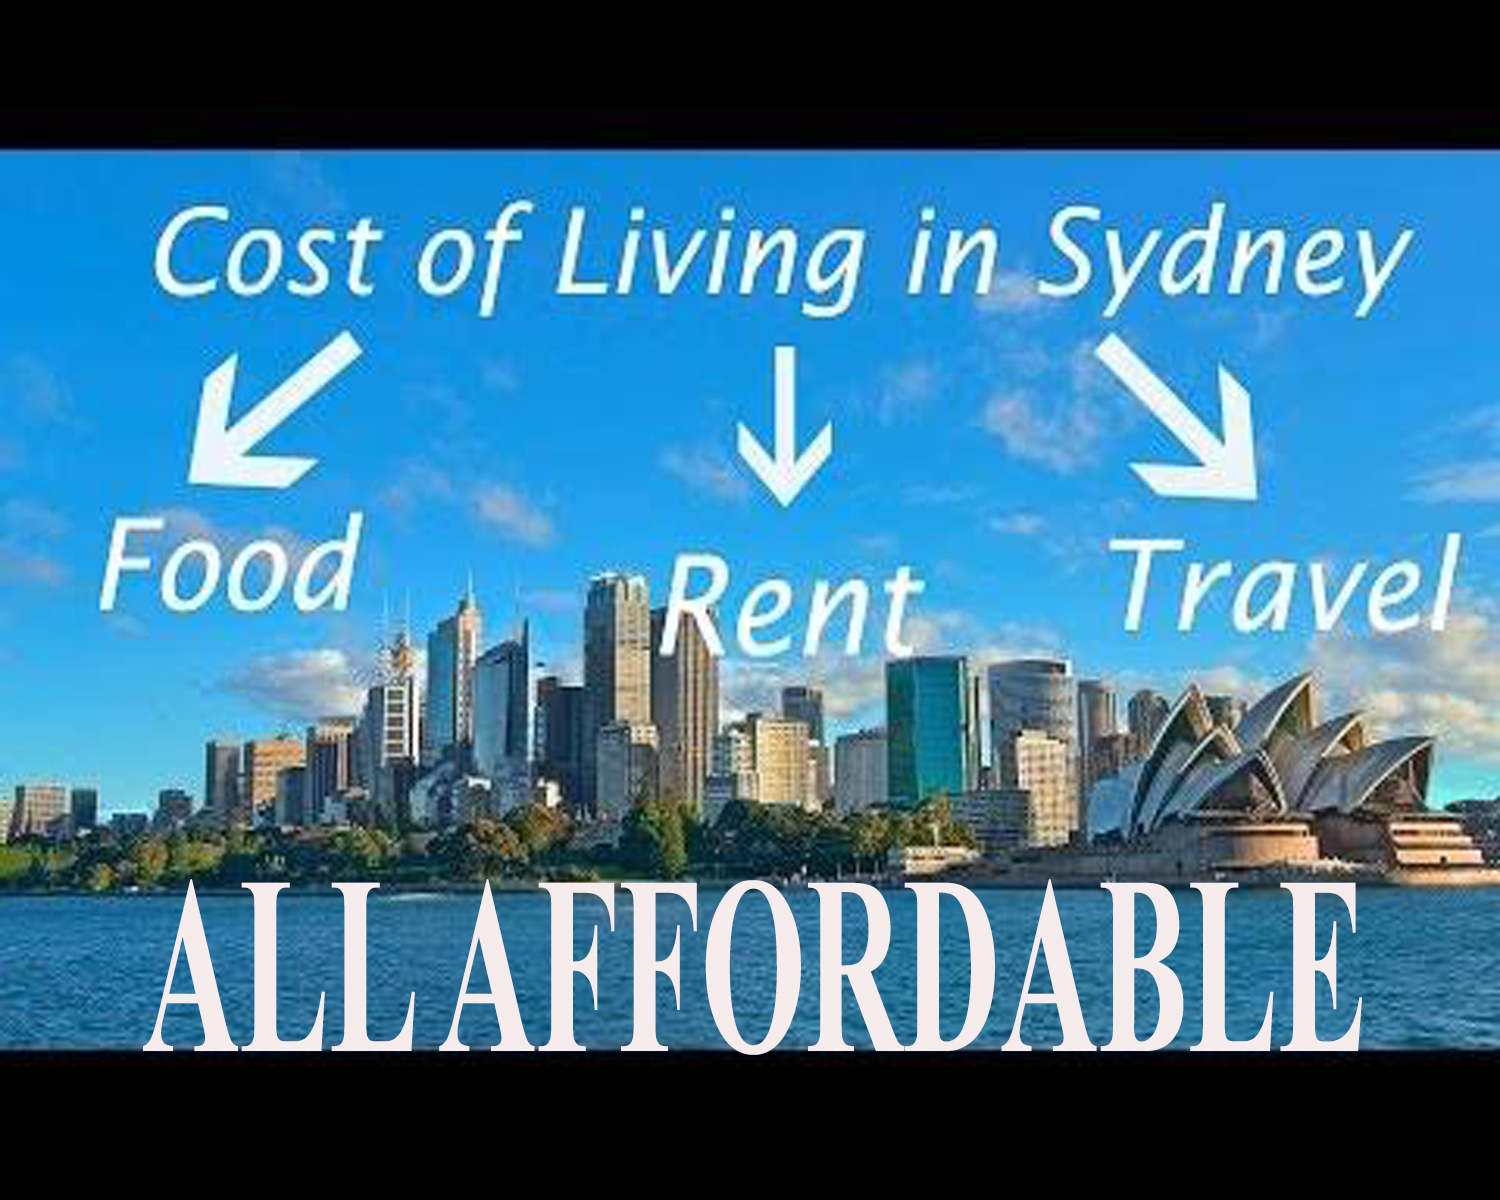 Sydney a Popular Place to Live in